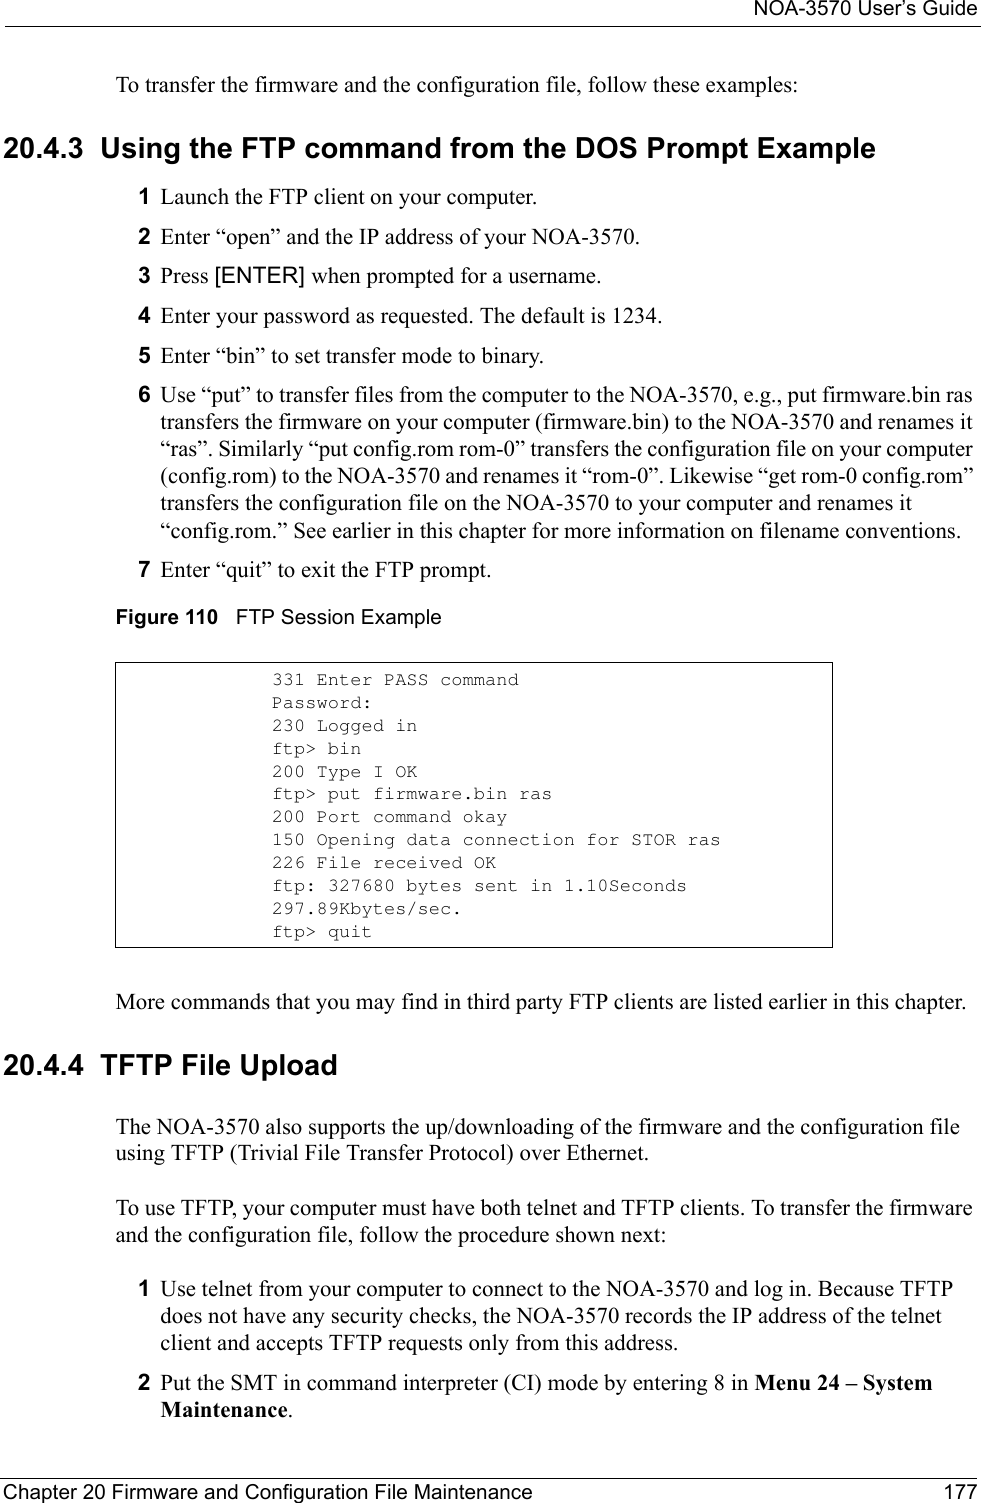 NOA-3570 User’s GuideChapter 20 Firmware and Configuration File Maintenance 177To transfer the firmware and the configuration file, follow these examples:20.4.3  Using the FTP command from the DOS Prompt Example1Launch the FTP client on your computer.2Enter “open” and the IP address of your NOA-3570.  3Press [ENTER] when prompted for a username.4Enter your password as requested. The default is 1234.5Enter “bin” to set transfer mode to binary.6Use “put” to transfer files from the computer to the NOA-3570, e.g., put firmware.bin ras transfers the firmware on your computer (firmware.bin) to the NOA-3570 and renames it “ras”. Similarly “put config.rom rom-0” transfers the configuration file on your computer (config.rom) to the NOA-3570 and renames it “rom-0”. Likewise “get rom-0 config.rom” transfers the configuration file on the NOA-3570 to your computer and renames it “config.rom.” See earlier in this chapter for more information on filename conventions.7Enter “quit” to exit the FTP prompt.Figure 110   FTP Session ExampleMore commands that you may find in third party FTP clients are listed earlier in this chapter.20.4.4  TFTP File UploadThe NOA-3570 also supports the up/downloading of the firmware and the configuration file using TFTP (Trivial File Transfer Protocol) over Ethernet.To use TFTP, your computer must have both telnet and TFTP clients. To transfer the firmware and the configuration file, follow the procedure shown next:1Use telnet from your computer to connect to the NOA-3570 and log in. Because TFTP does not have any security checks, the NOA-3570 records the IP address of the telnet client and accepts TFTP requests only from this address.2Put the SMT in command interpreter (CI) mode by entering 8 in Menu 24 – System Maintenance.331 Enter PASS commandPassword:230 Logged inftp&gt; bin200 Type I OKftp&gt; put firmware.bin ras200 Port command okay150 Opening data connection for STOR ras226 File received OKftp: 327680 bytes sent in 1.10Seconds 297.89Kbytes/sec.ftp&gt; quit